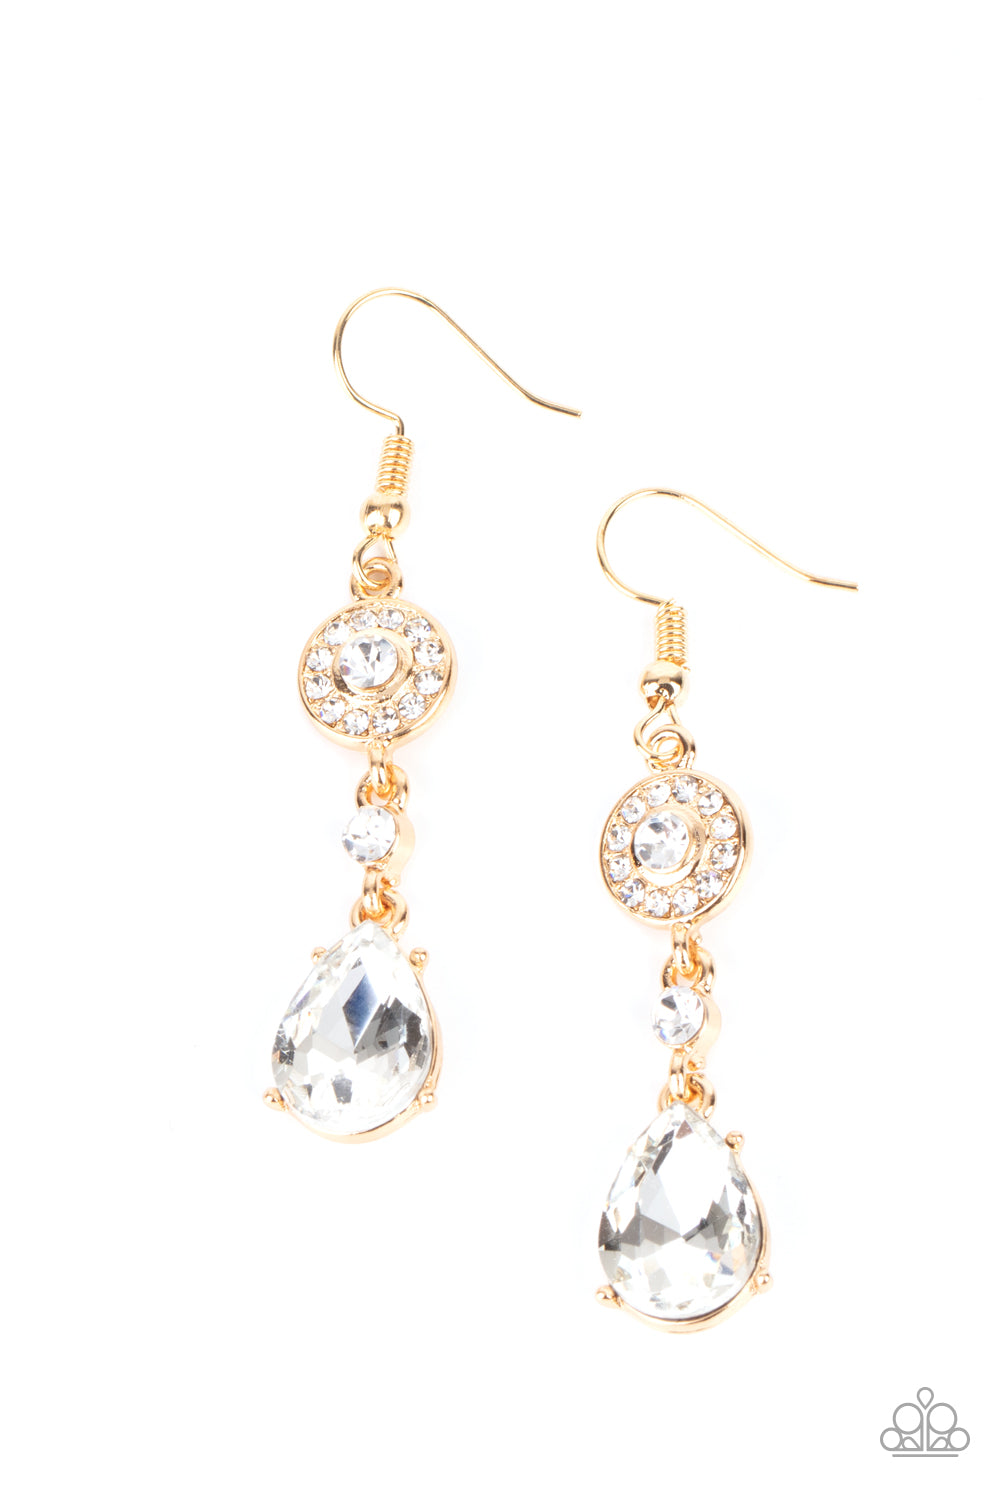 Graceful Glimmer - Gold with Rhinestone Earrings - Paparazzi Accessories